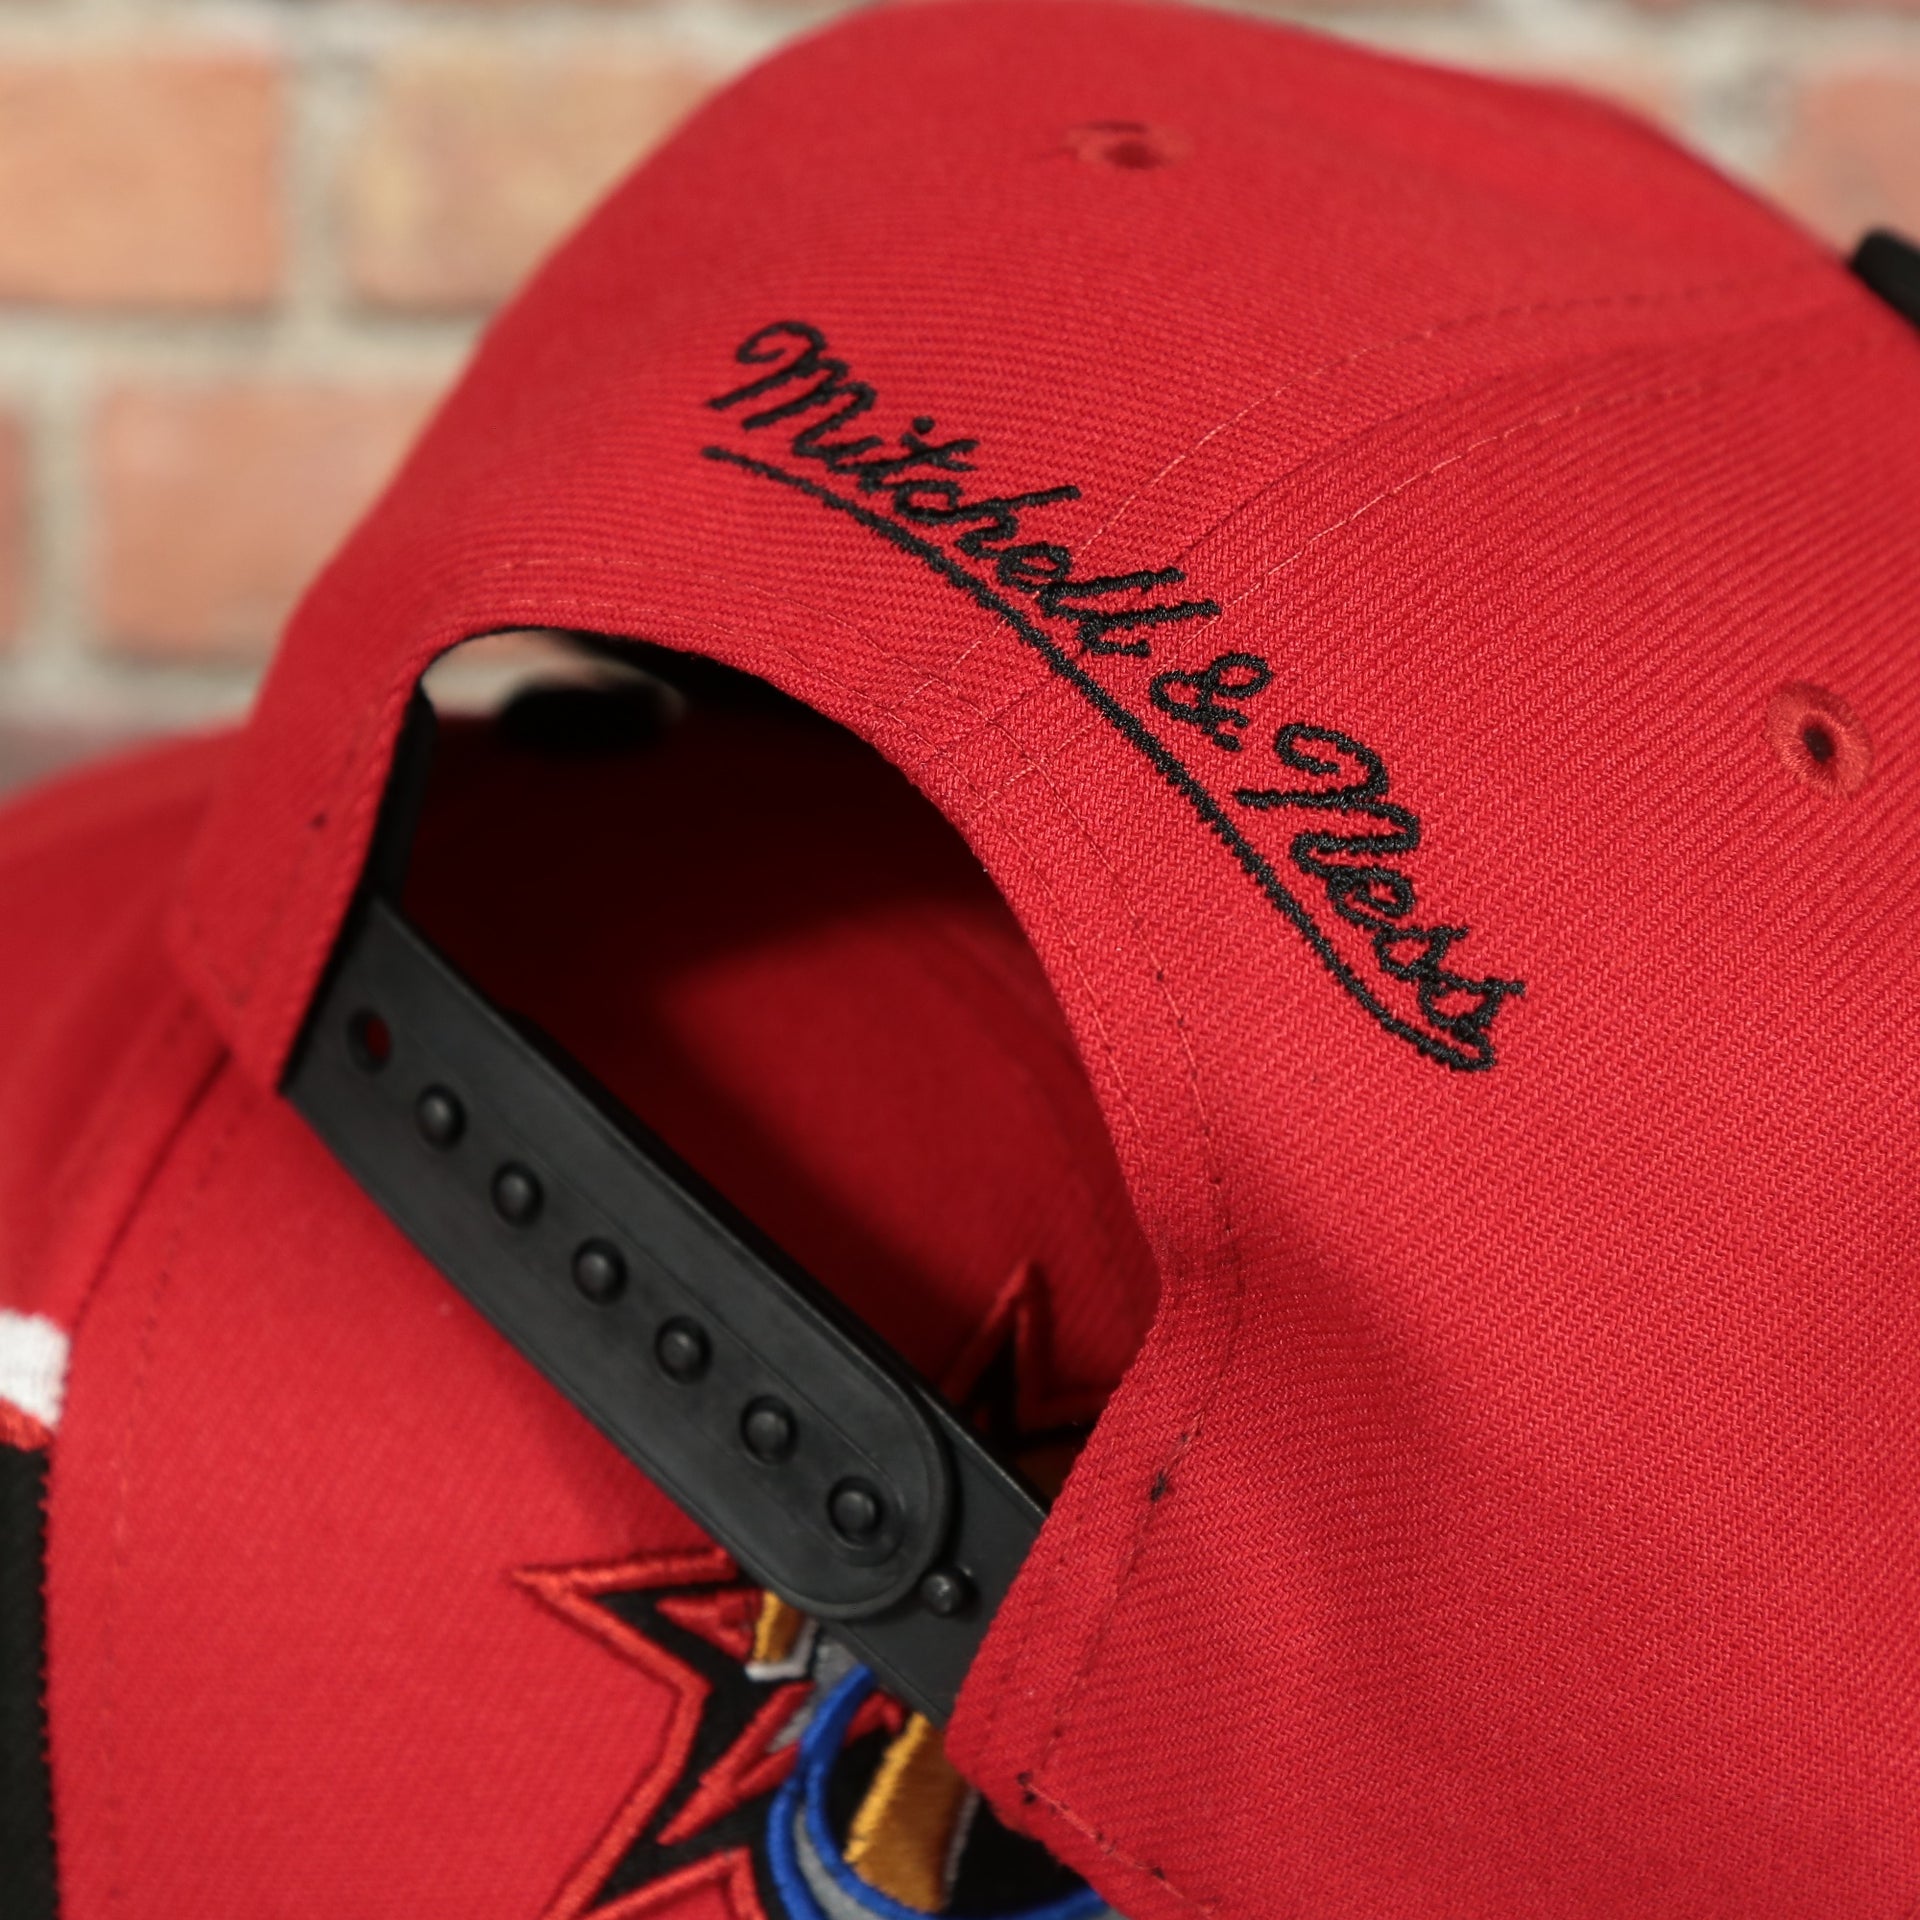 mitchell and ness logo on the Philadelphia 76ers Hardwood Classics Jumbotron "76ers" Ripped Wordmark side patch Grey Bottom Red/Black Snapback hat | Mitchell and Ness Two Tone Snap Cap